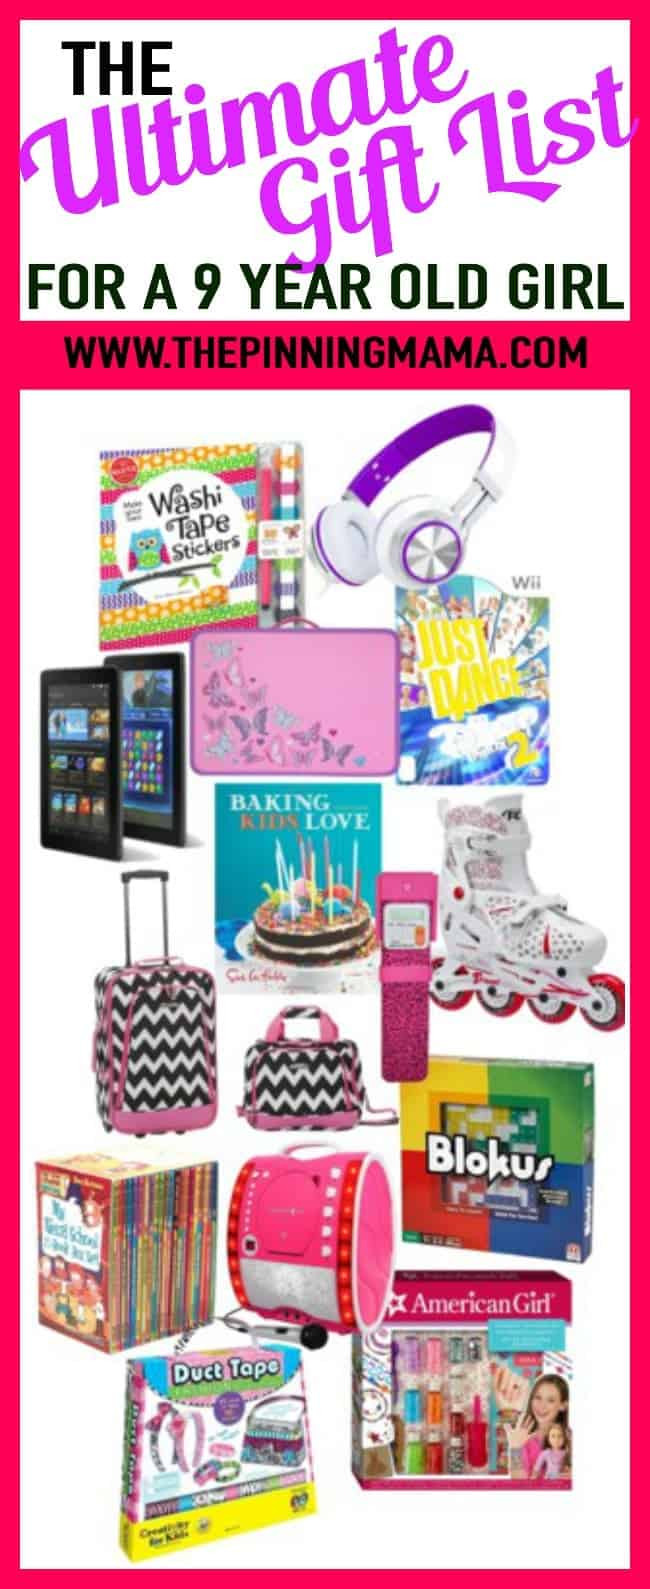 Gift Ideas For Girls Age 9
 The Ultimate Gift List for a 9 Year Old Girl